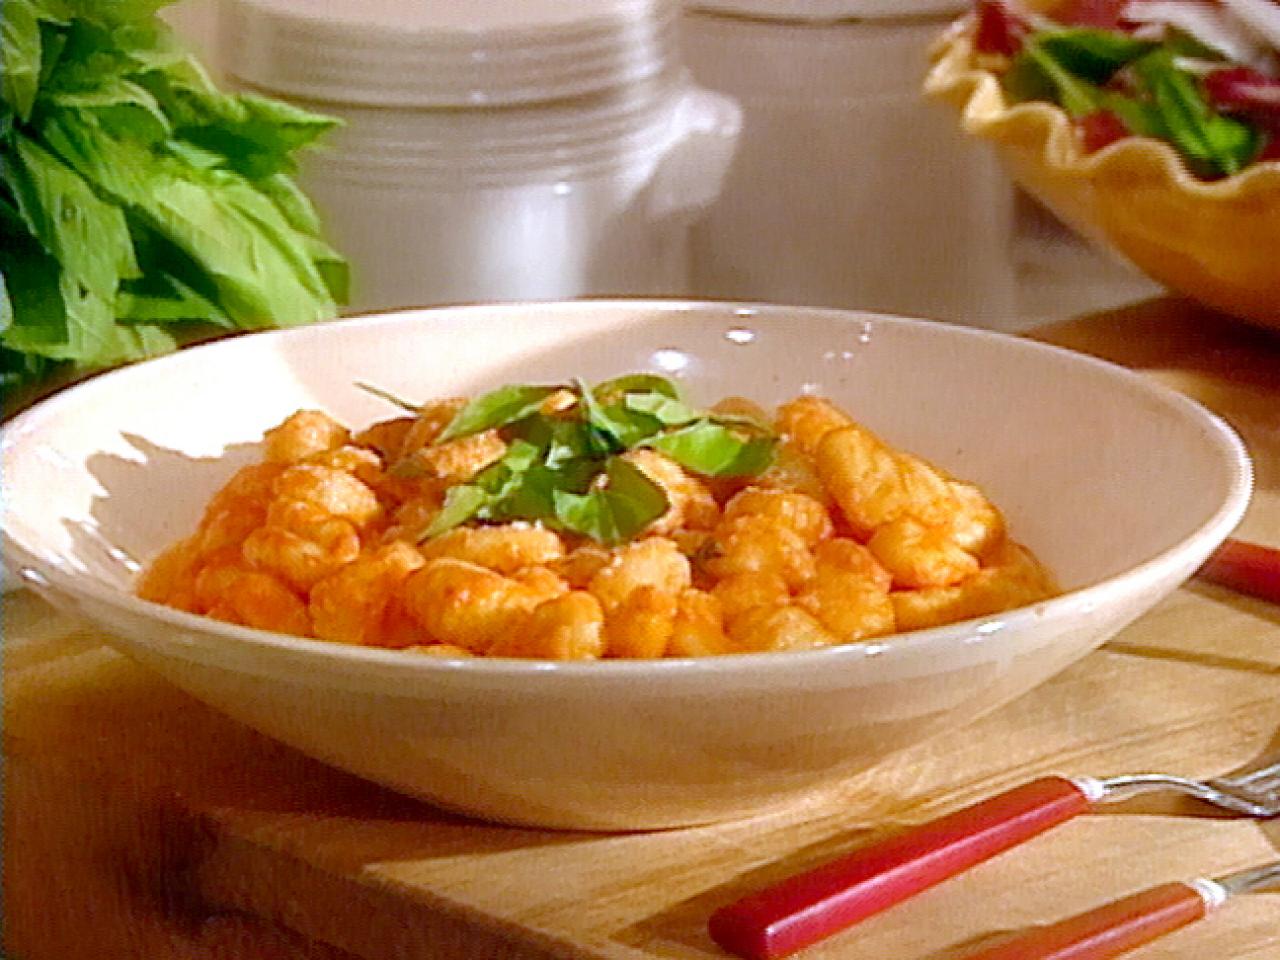 Kim the Foodie - Spicy Gnocchi with Roasted Red Peppers